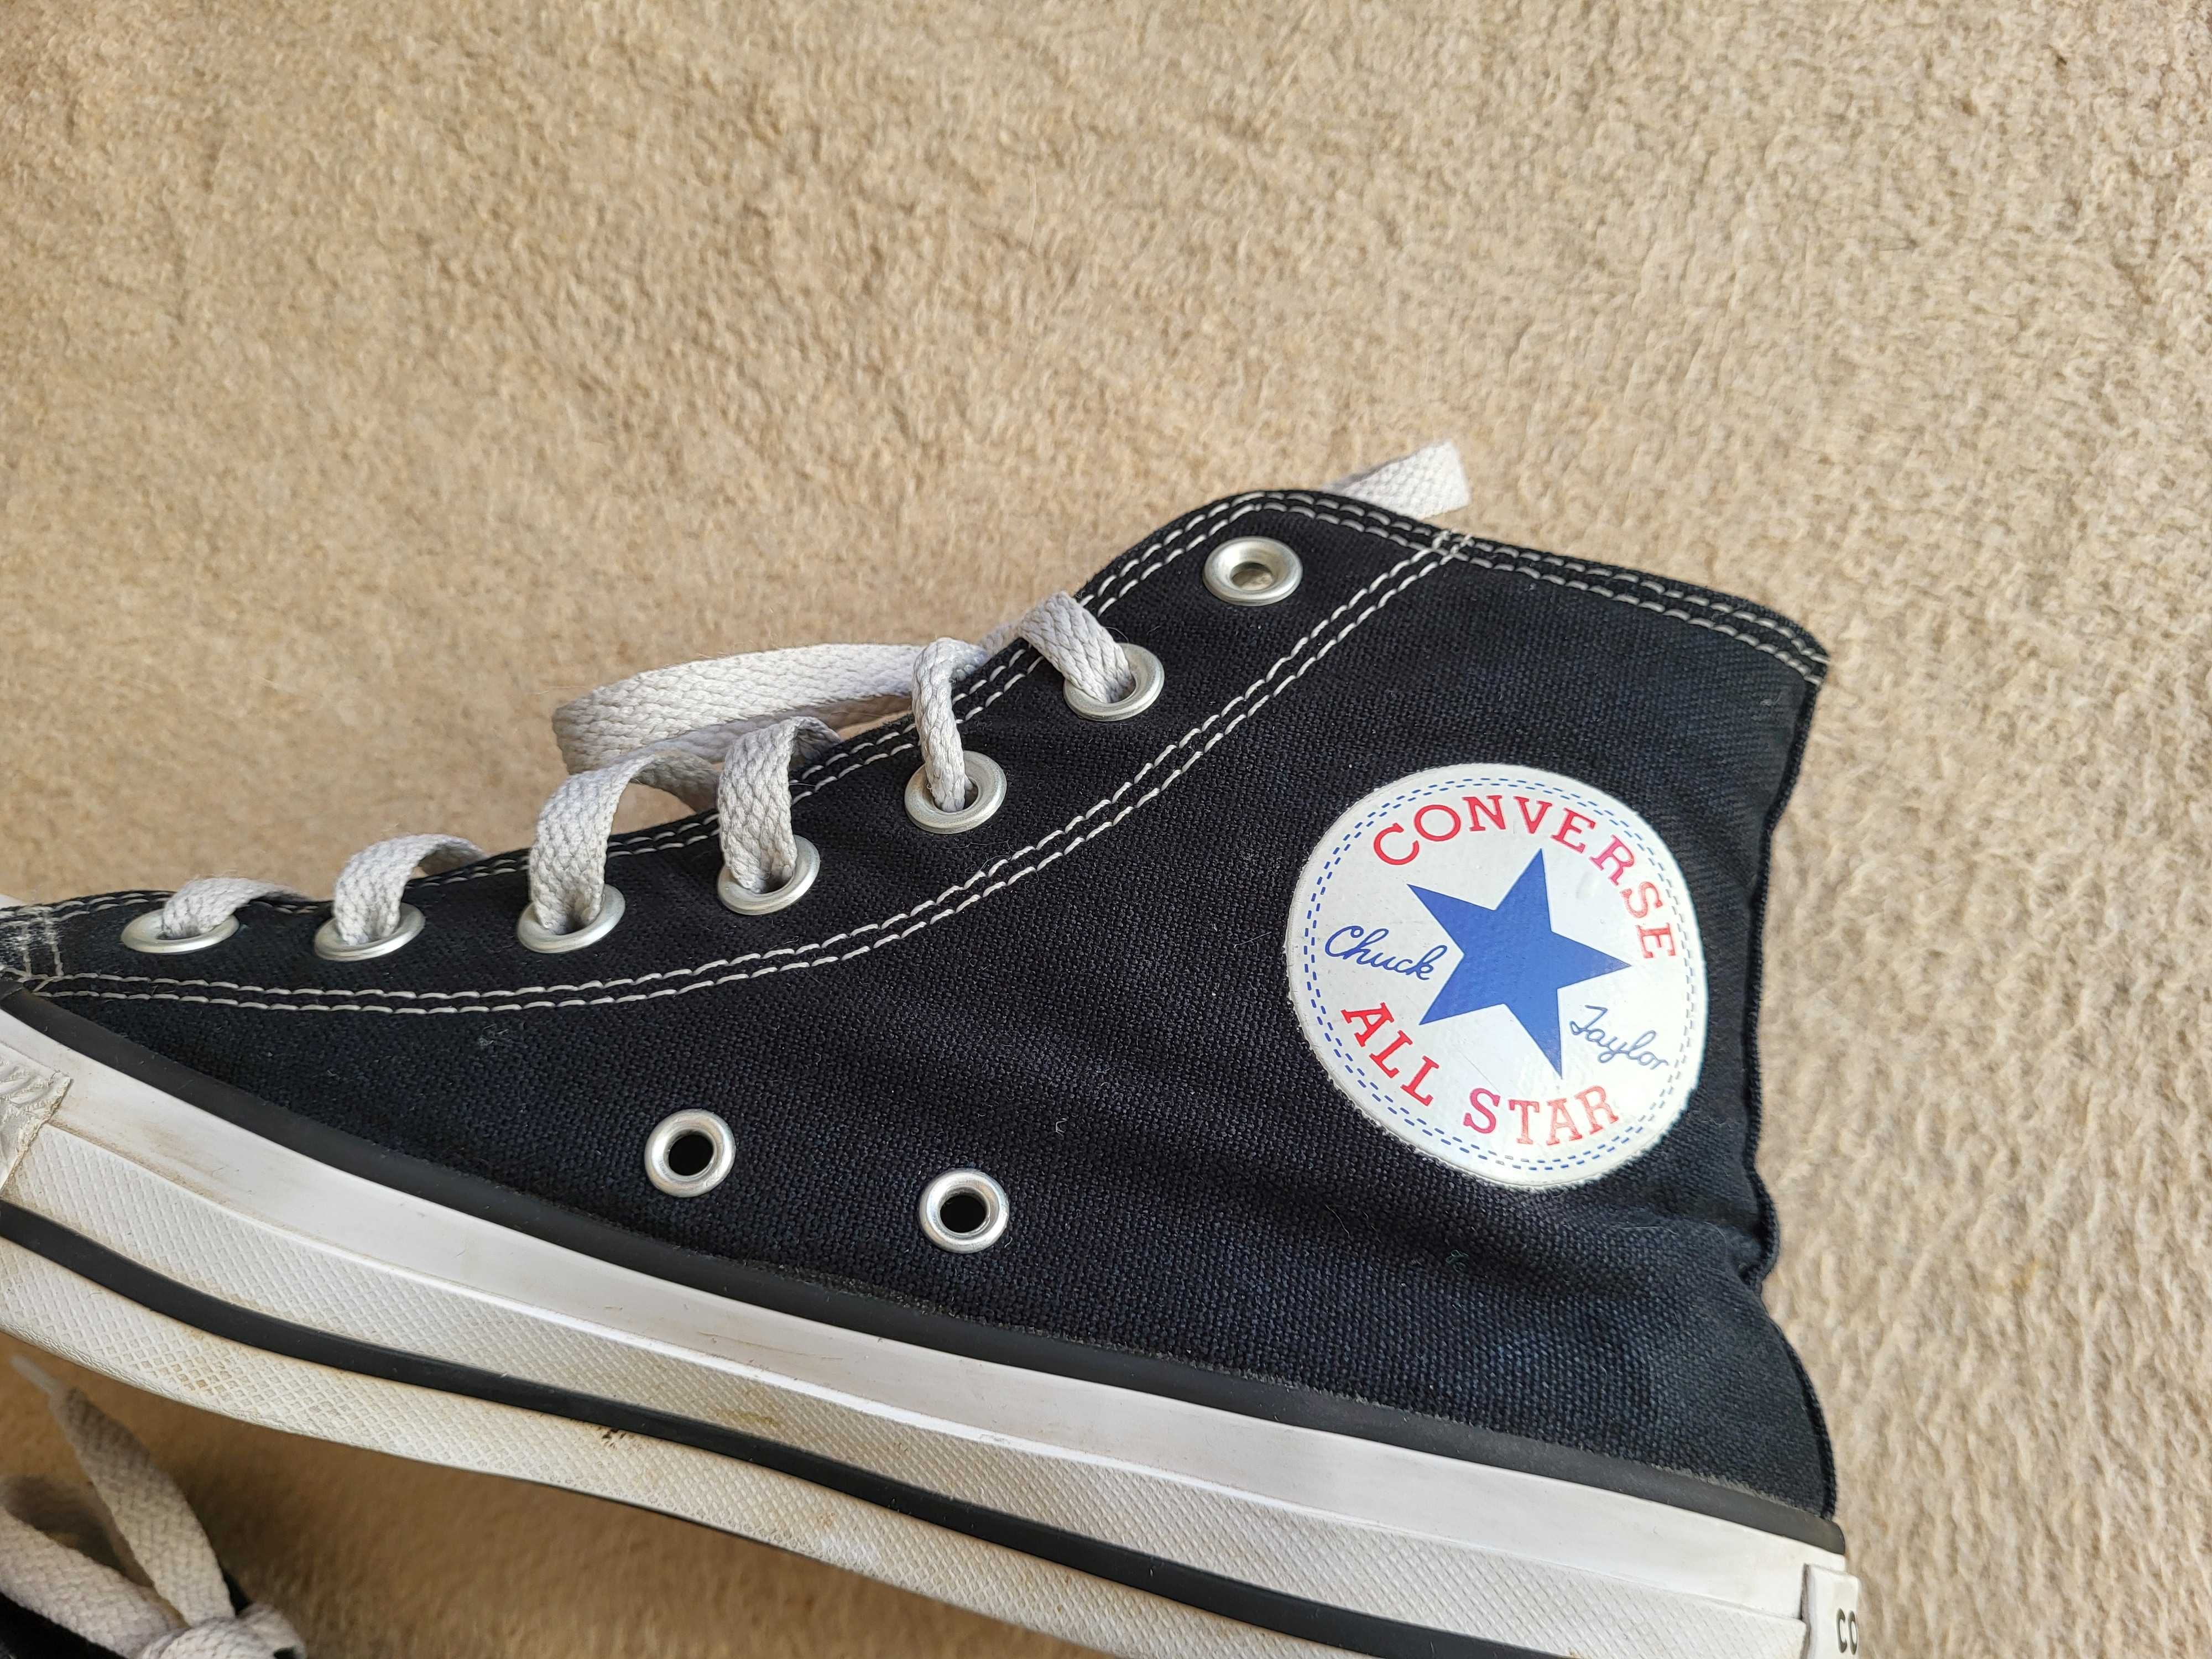 Oryginalne buty Converse All Star